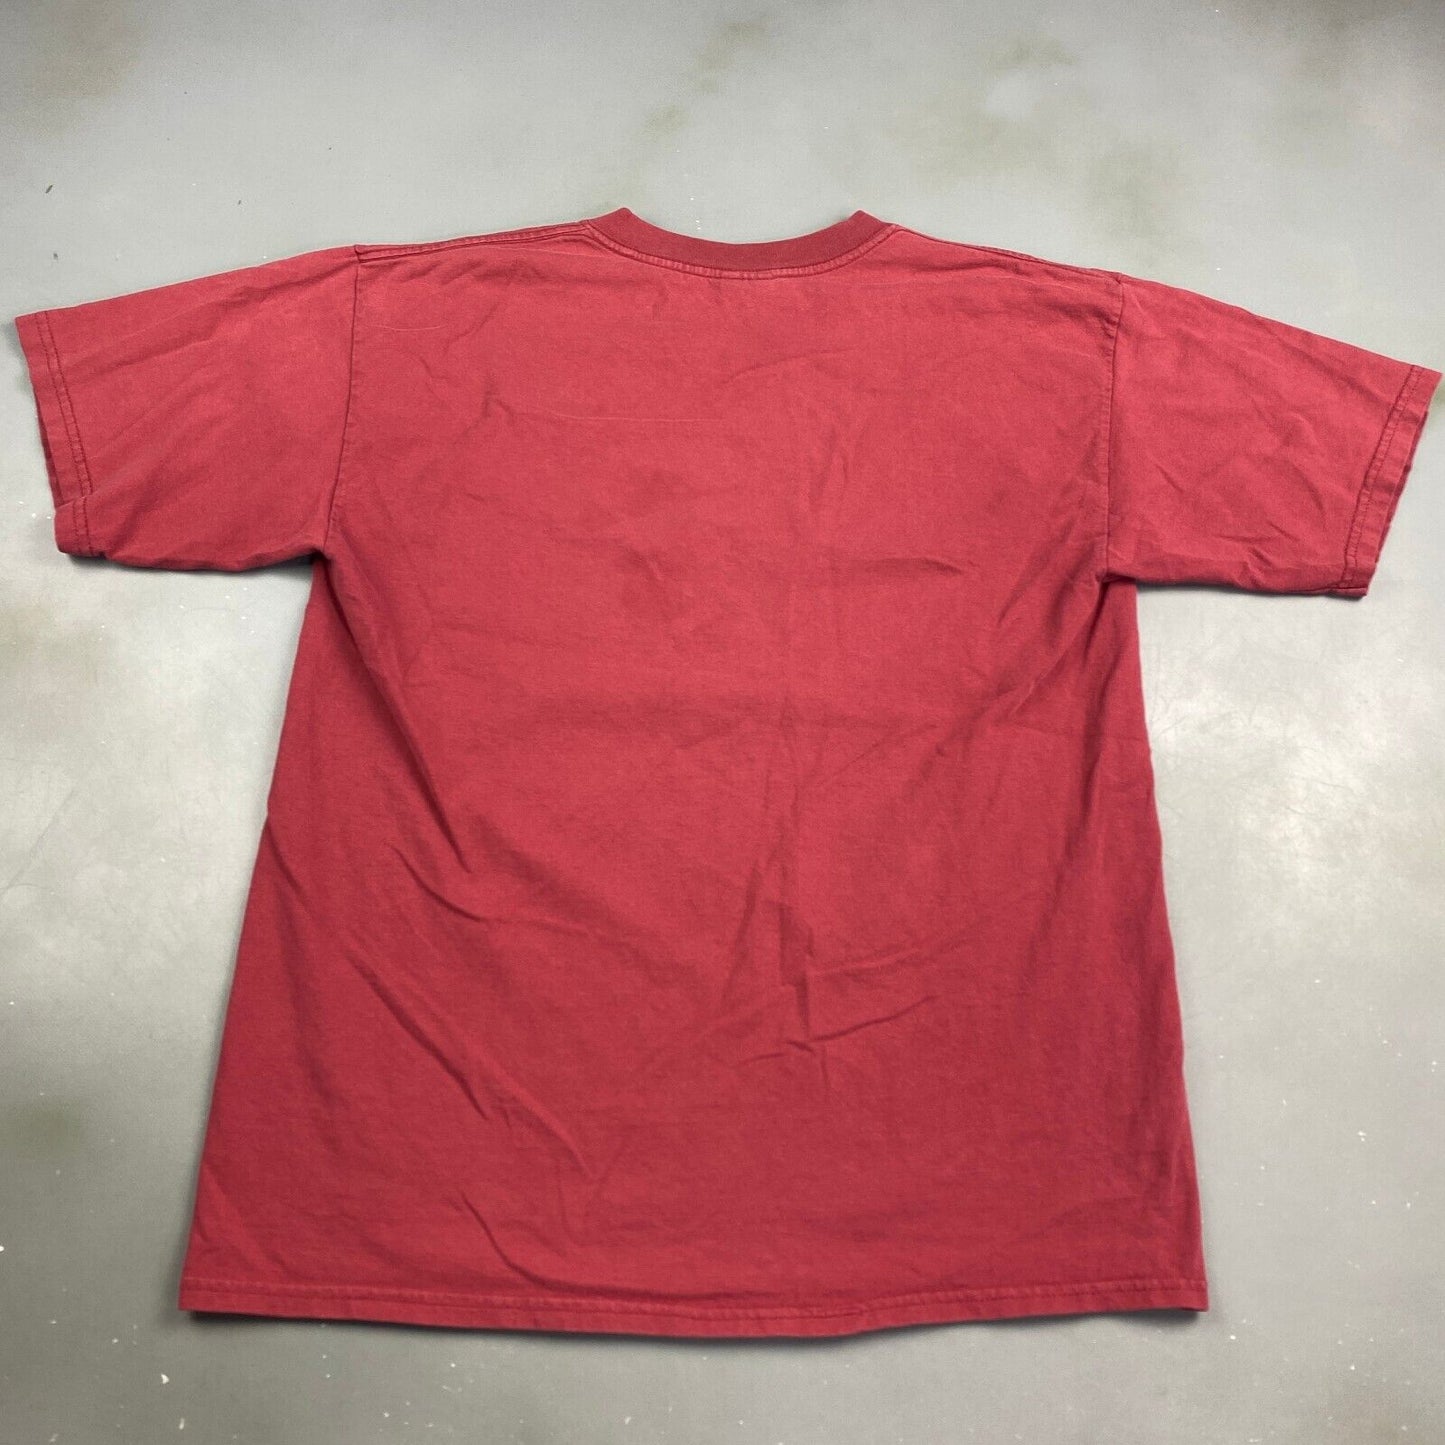 VINTAGE Duck Tape Red T-Shirt sz Large Adult